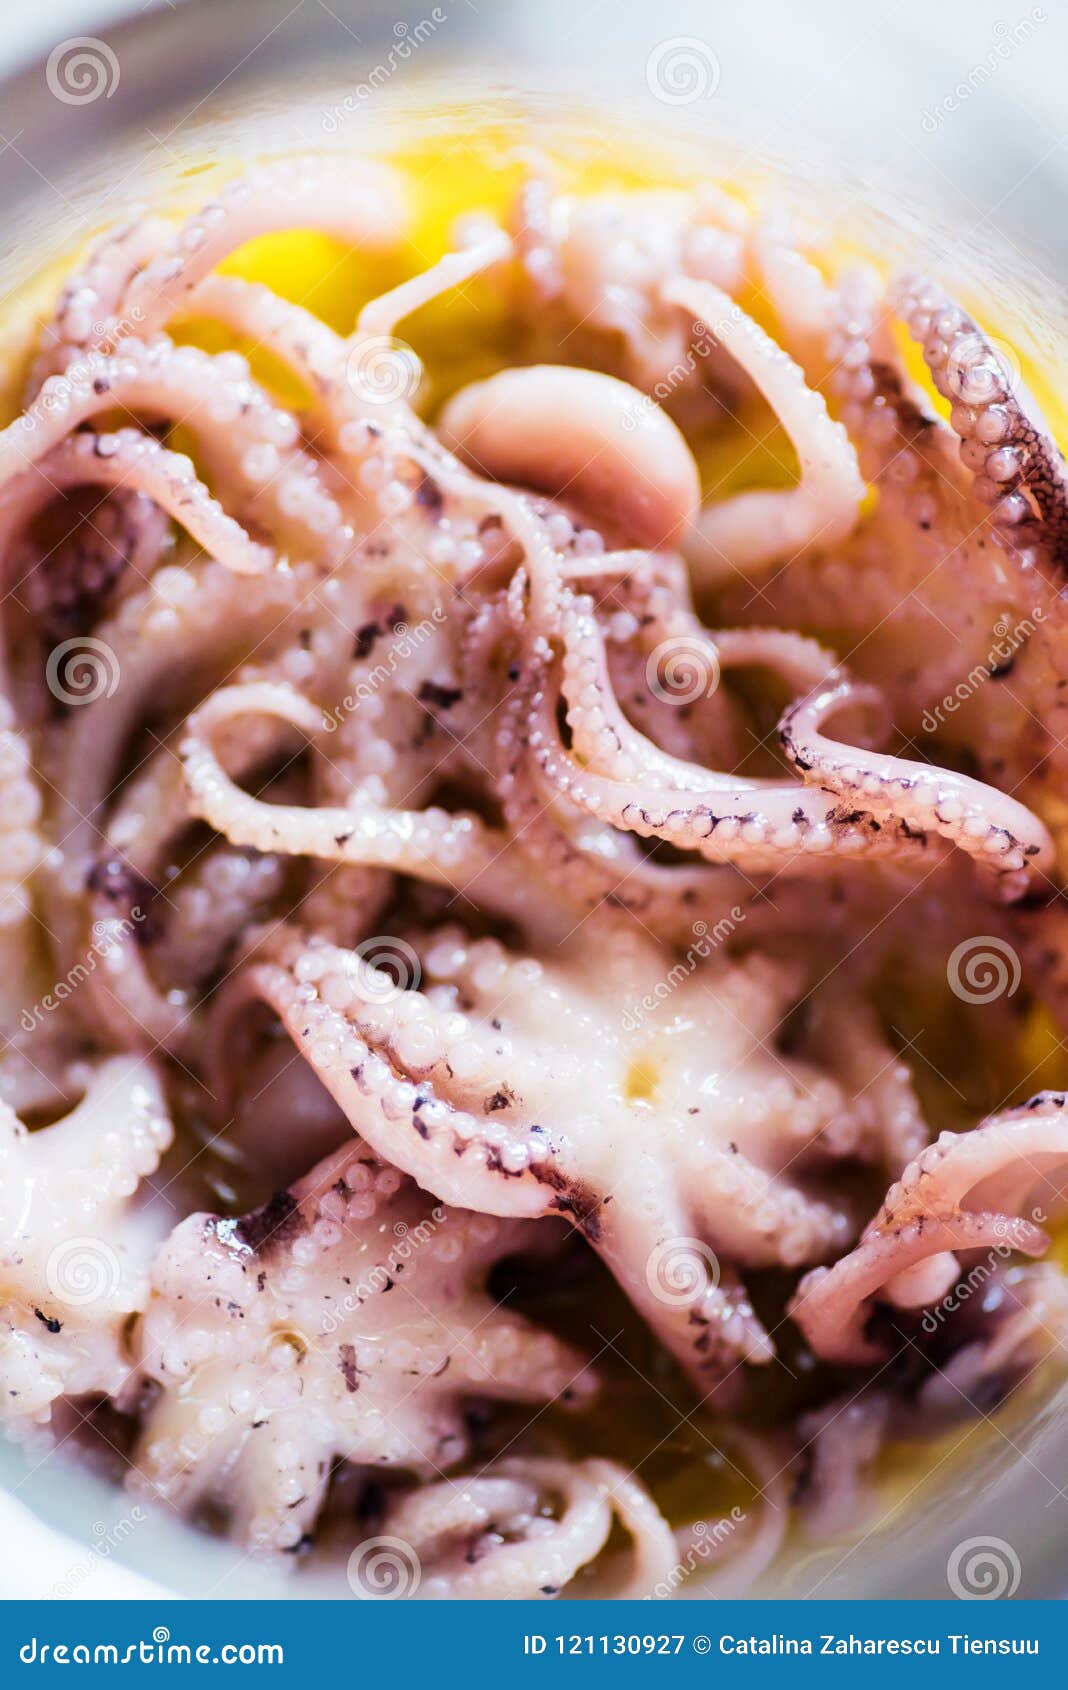 Close-up Image of Marinated Baby Octopus Stock Image - Image of eating ...